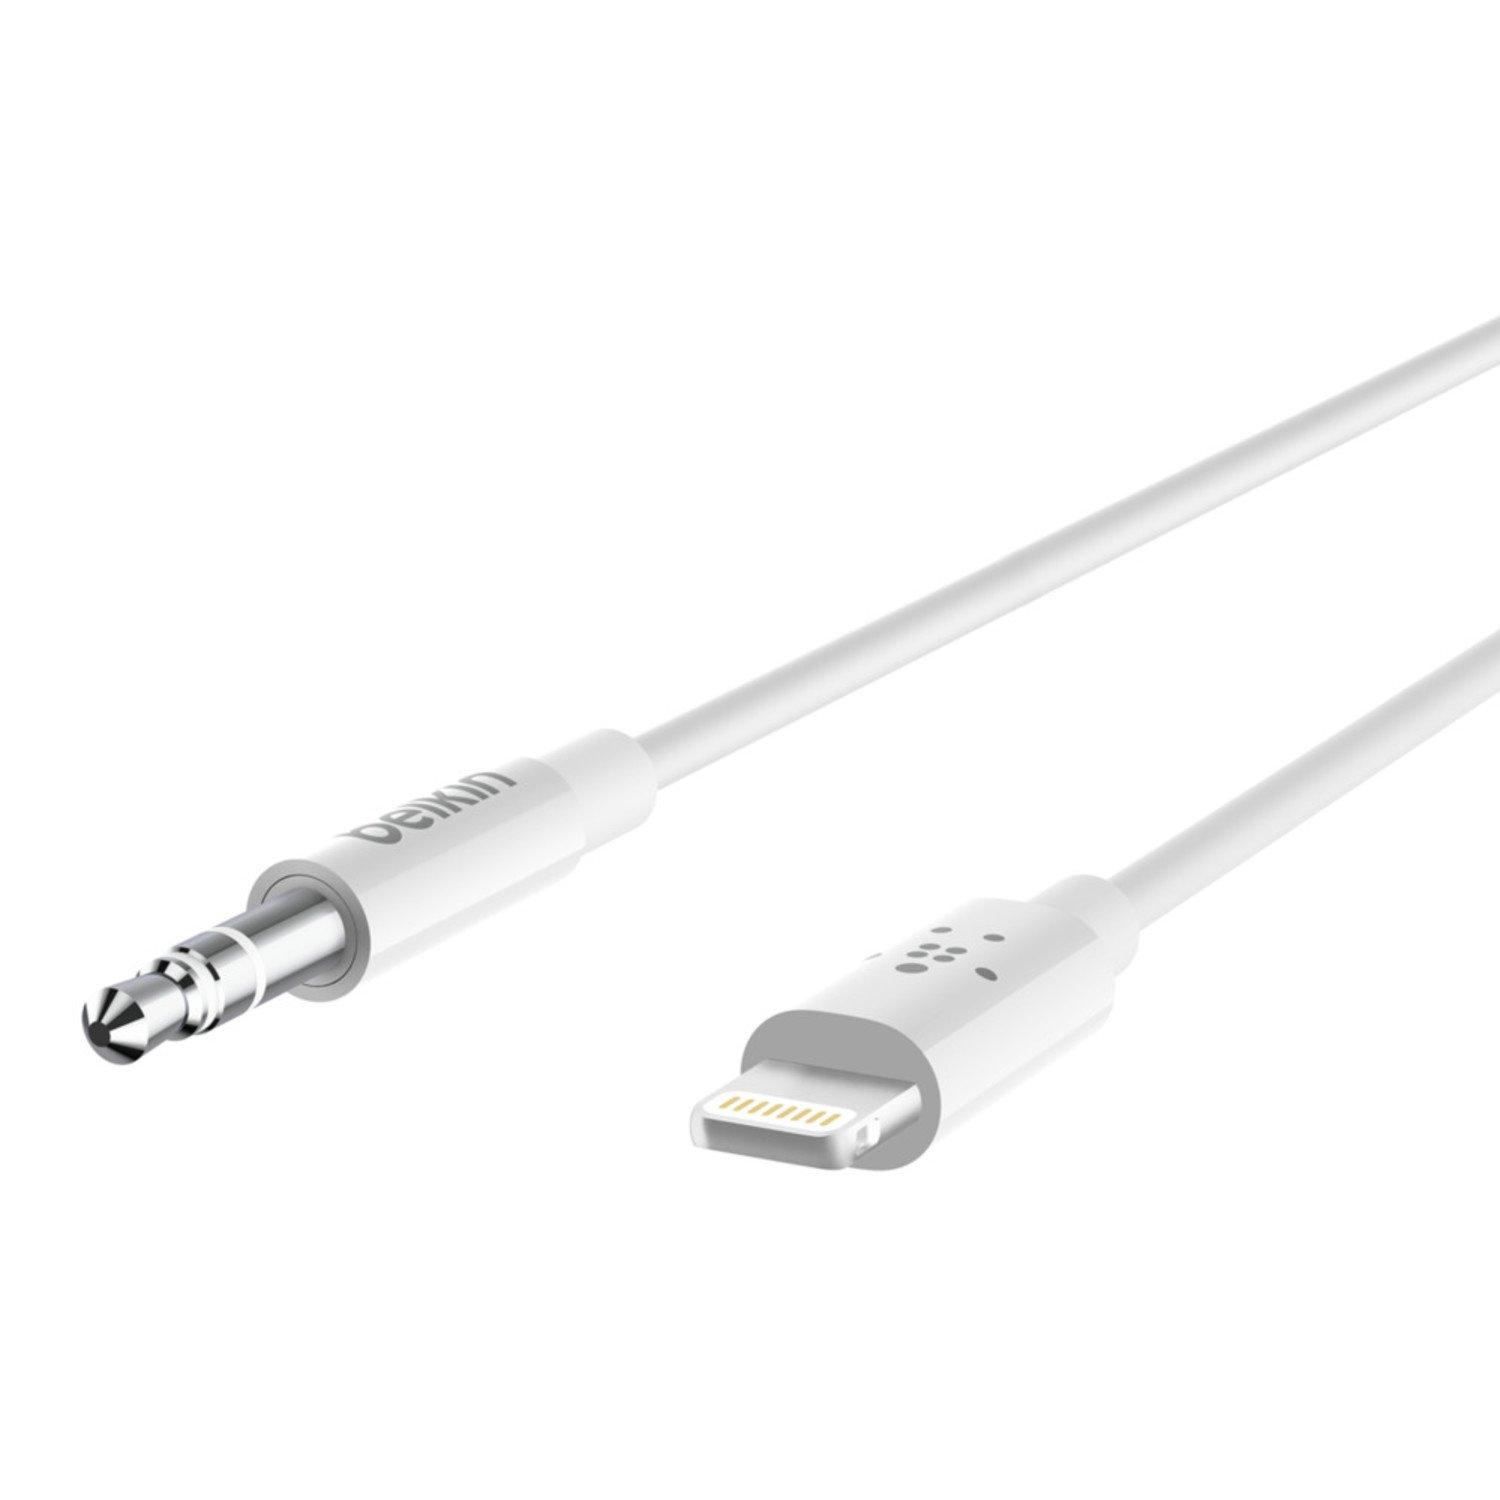 Iphone Connector Usb, Auxiliary Cable For Iphone